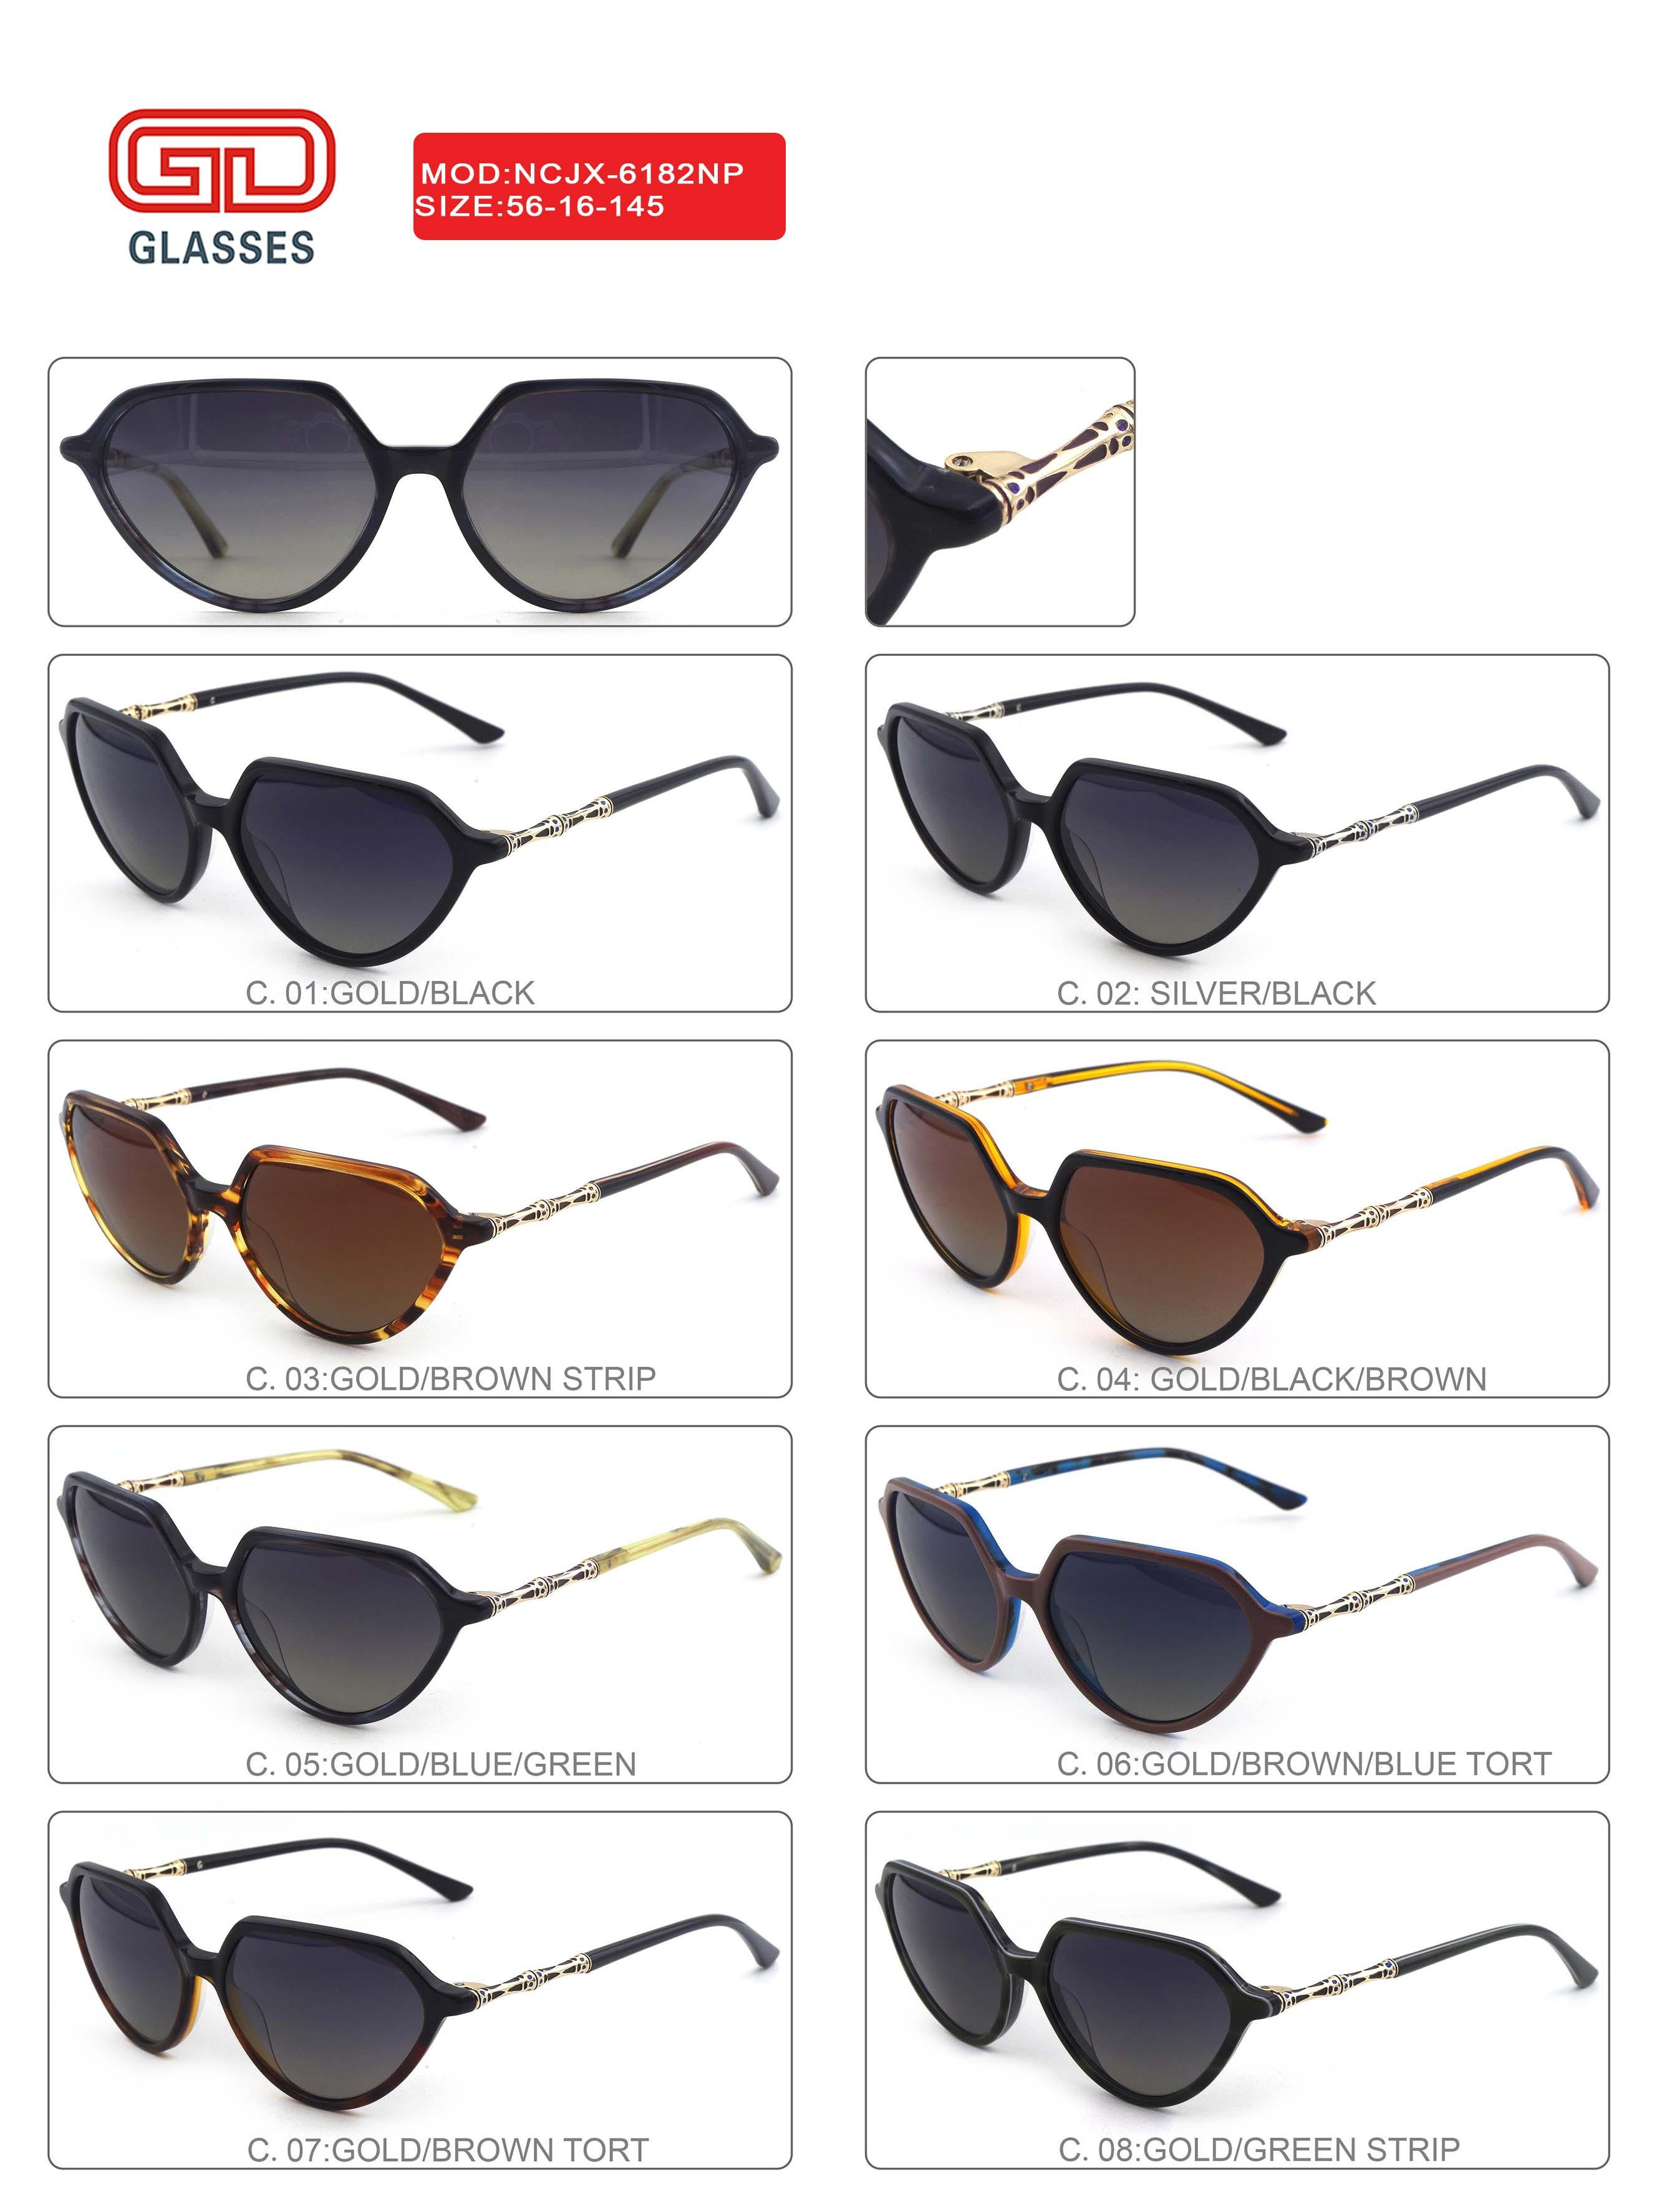 Introducing GUANDE ACETATE Sunglasses The Perfect Blend of Style and Functionality